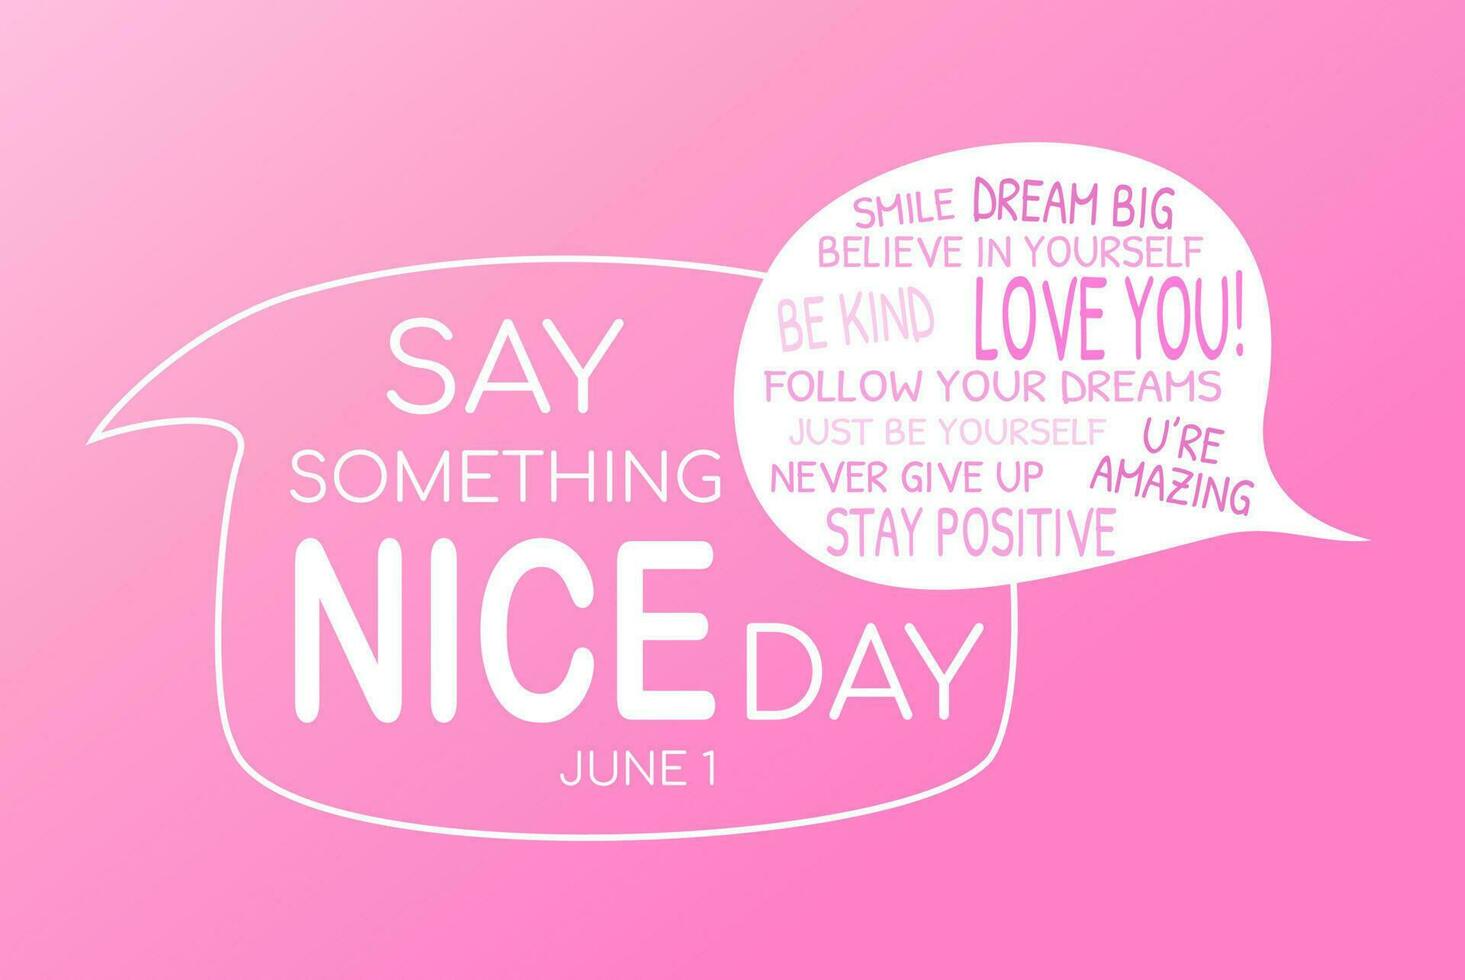 Say something nice day poster vector illustration